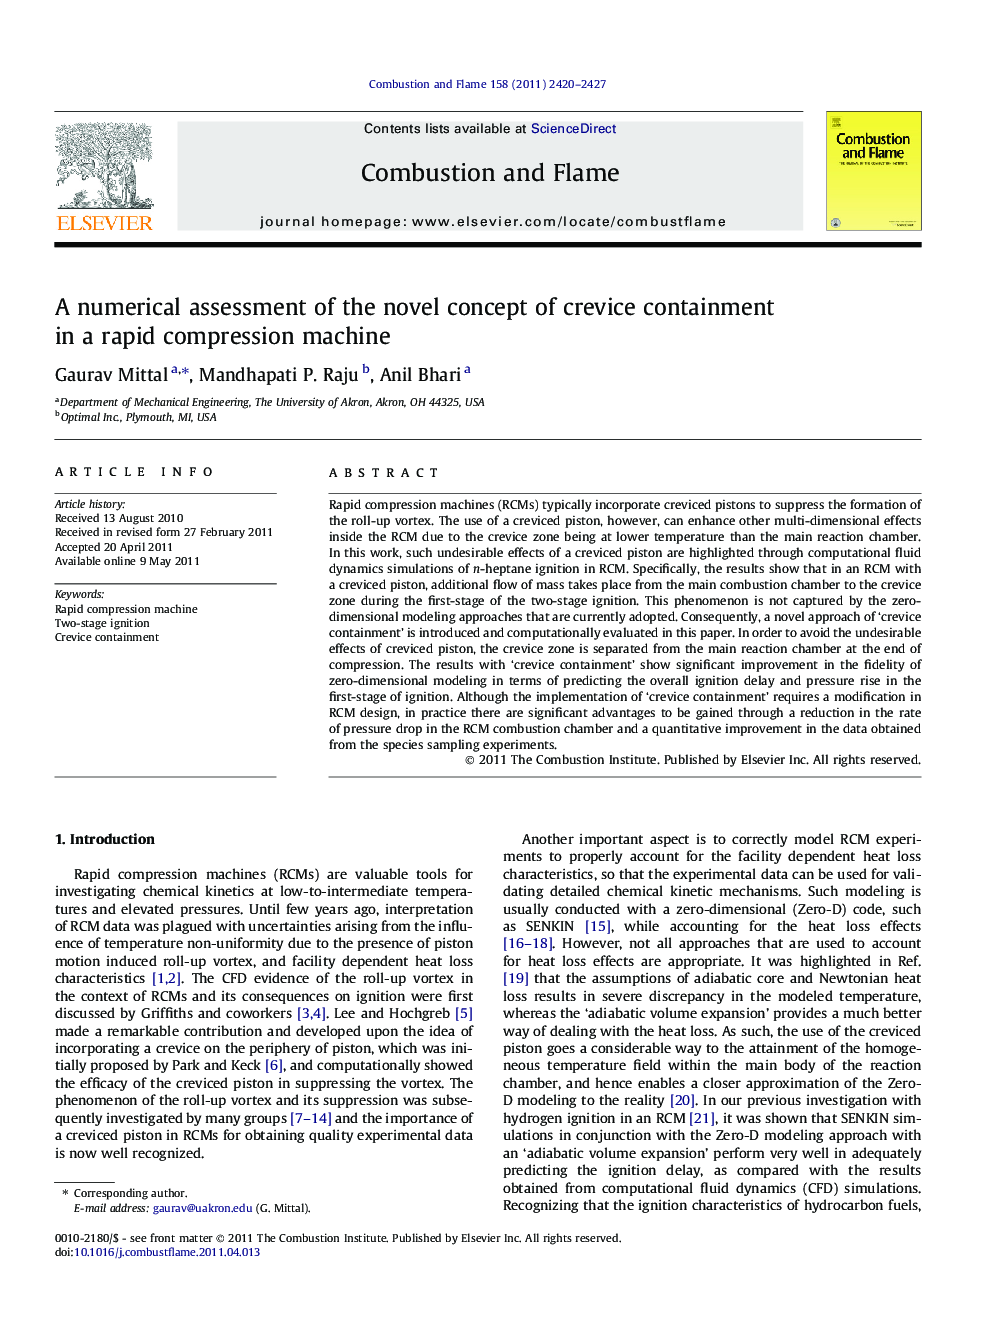 A numerical assessment of the novel concept of crevice containment in a rapid compression machine